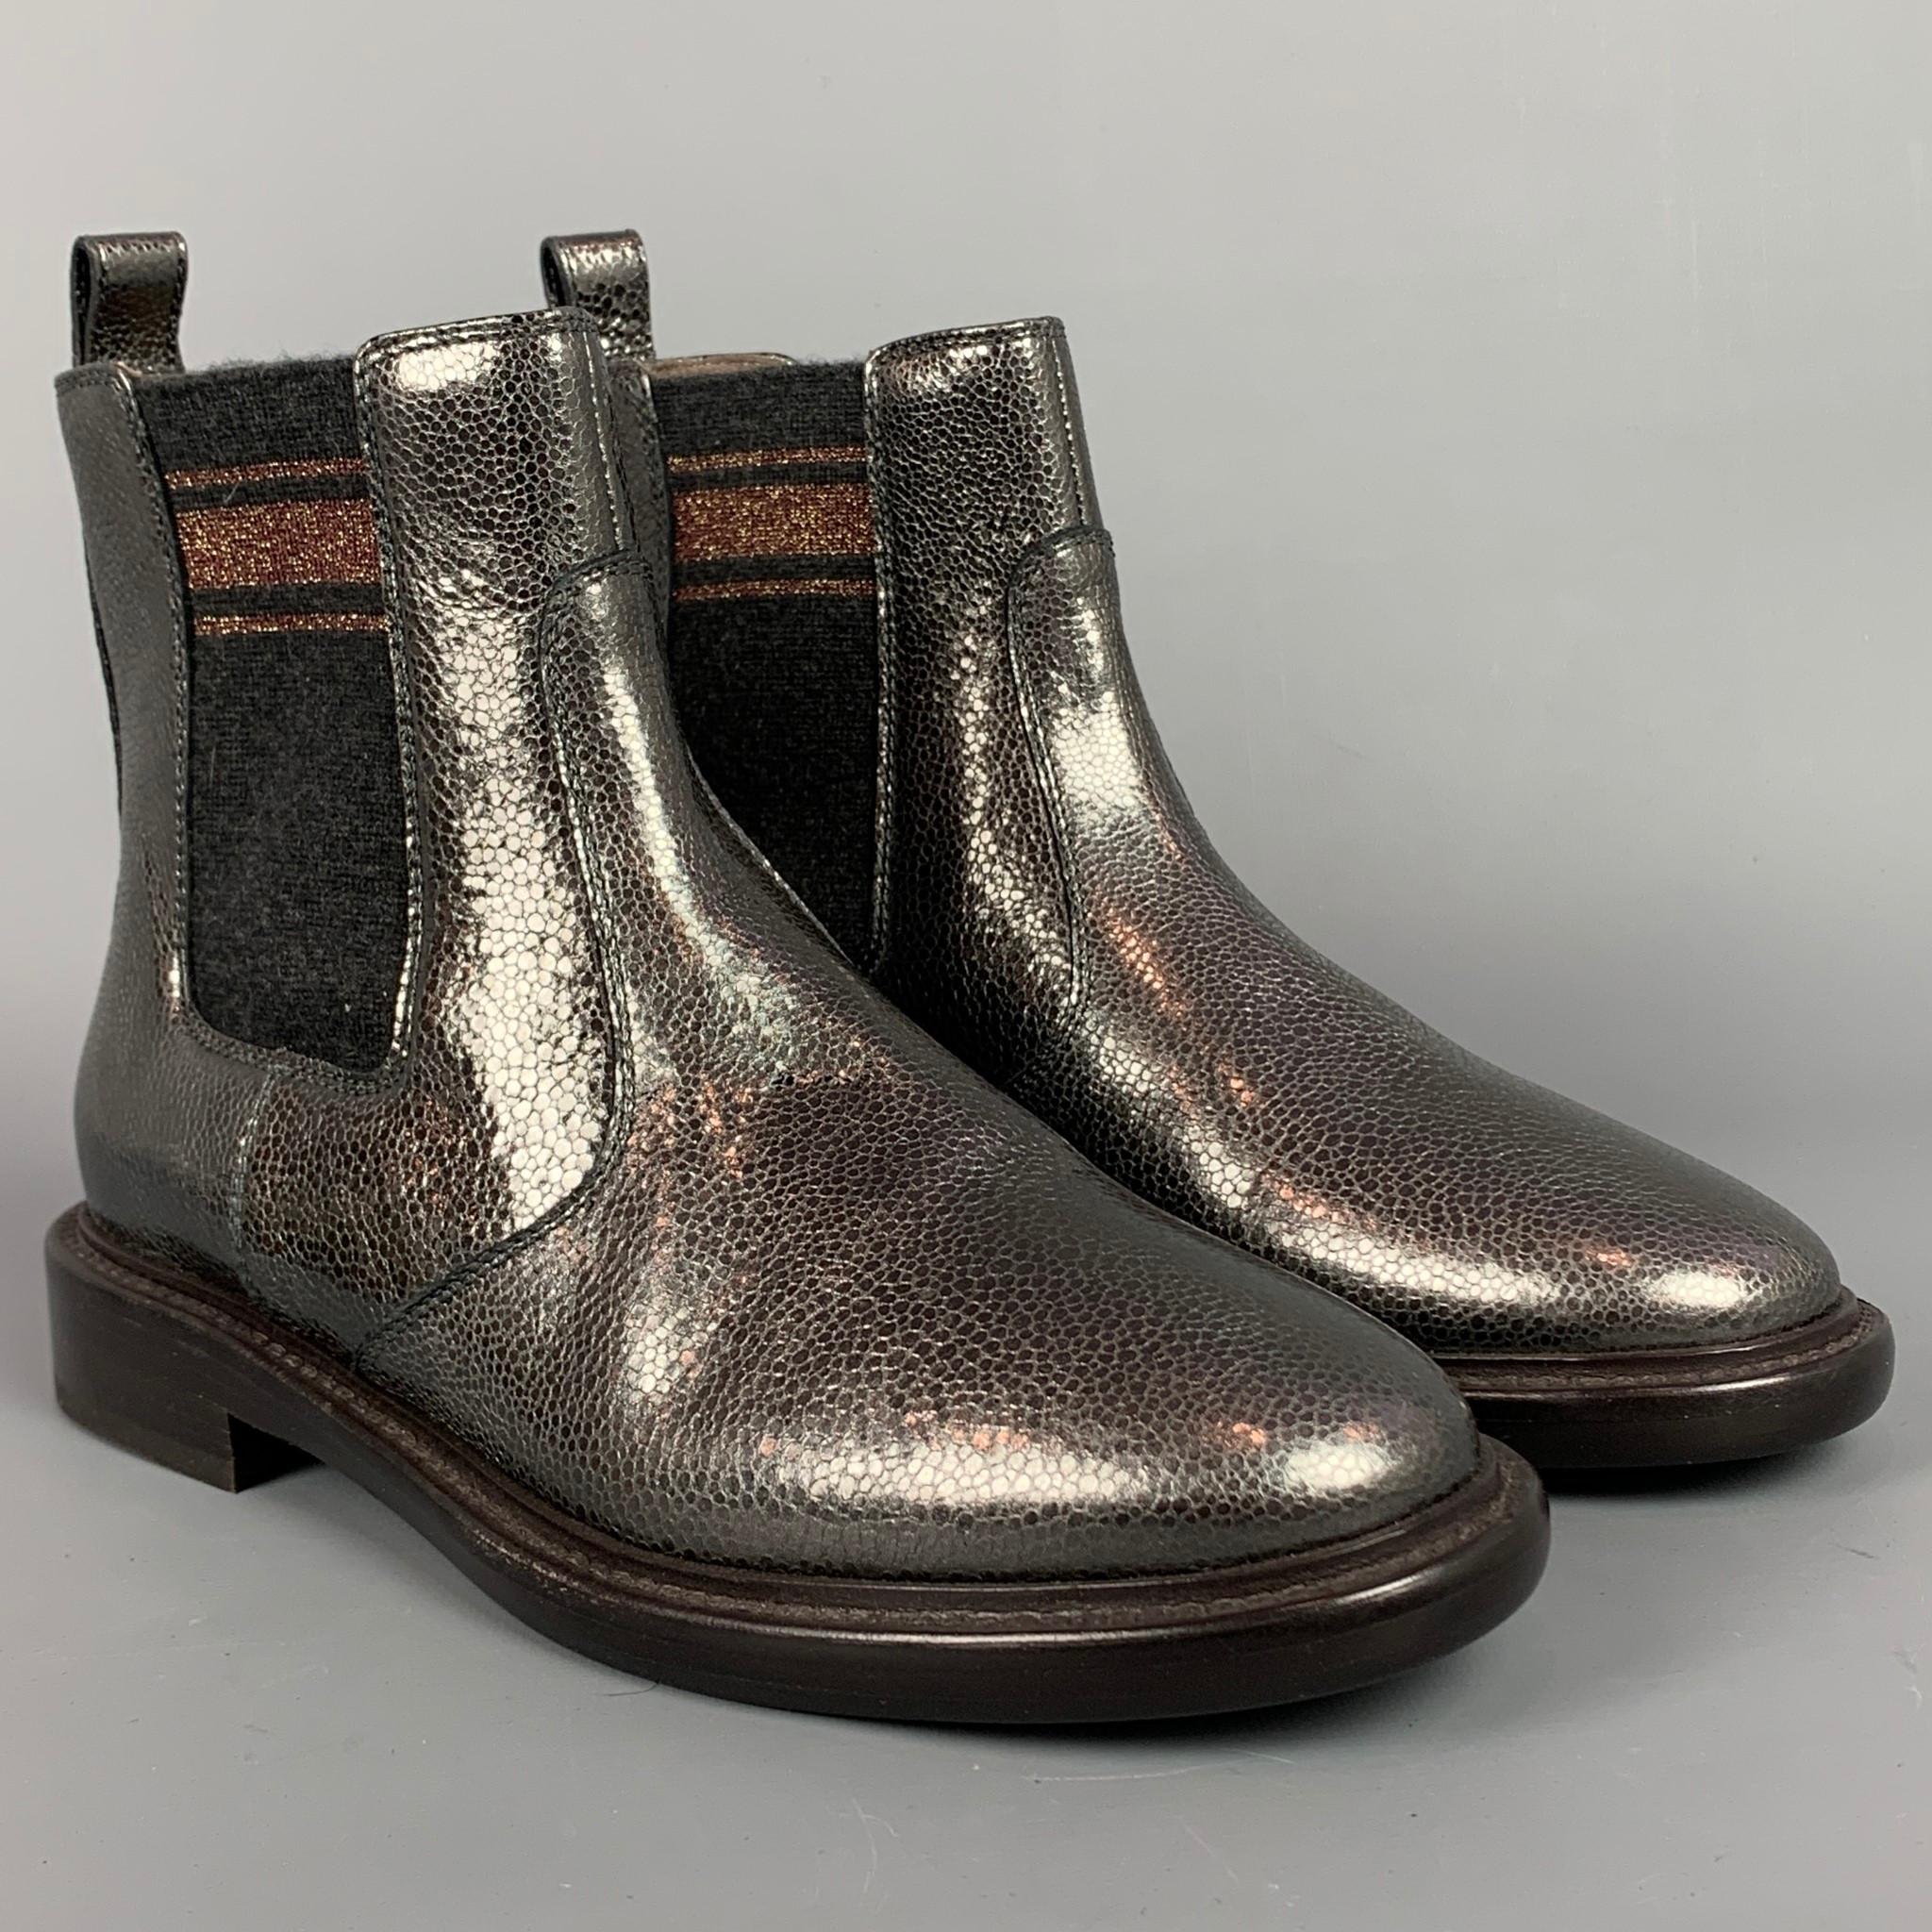 BRUNELLO CUCINELLI boots comes in a pewter & charcoal leather featuring a chelsea style, pull on, gold trim detail, and a wooden sole. Made in Italy.

New Without Tags. 
Marked: IT 38
Original Retail Price: $1,295.00

Measurements:

Length: 10.5